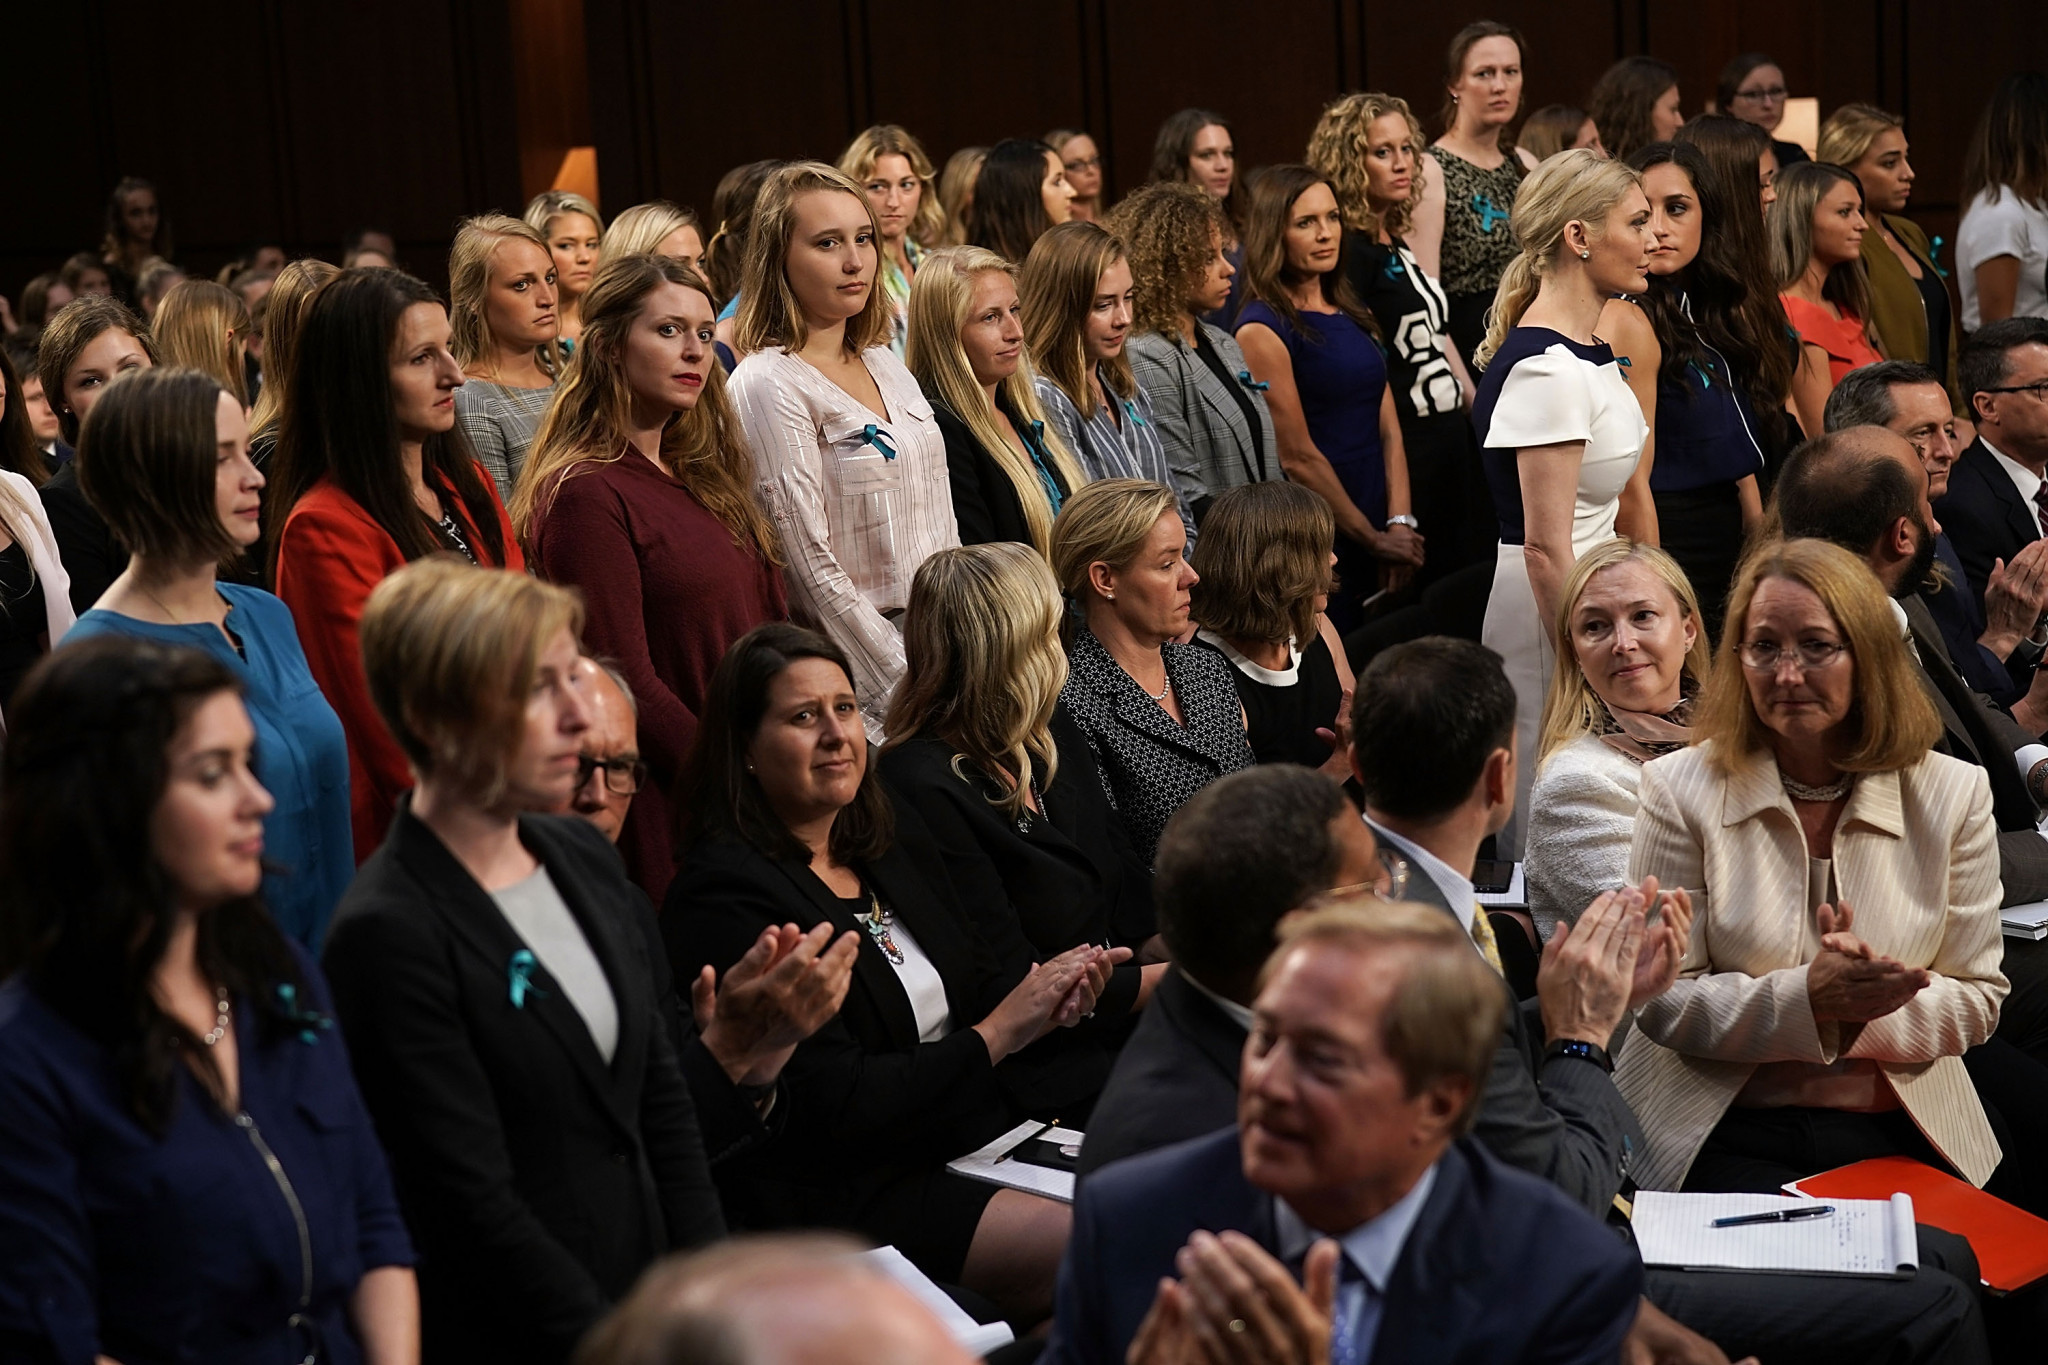 Survivors of Larry Nassar's abuse were asked to stand at one point during the hearing ©Getty Images